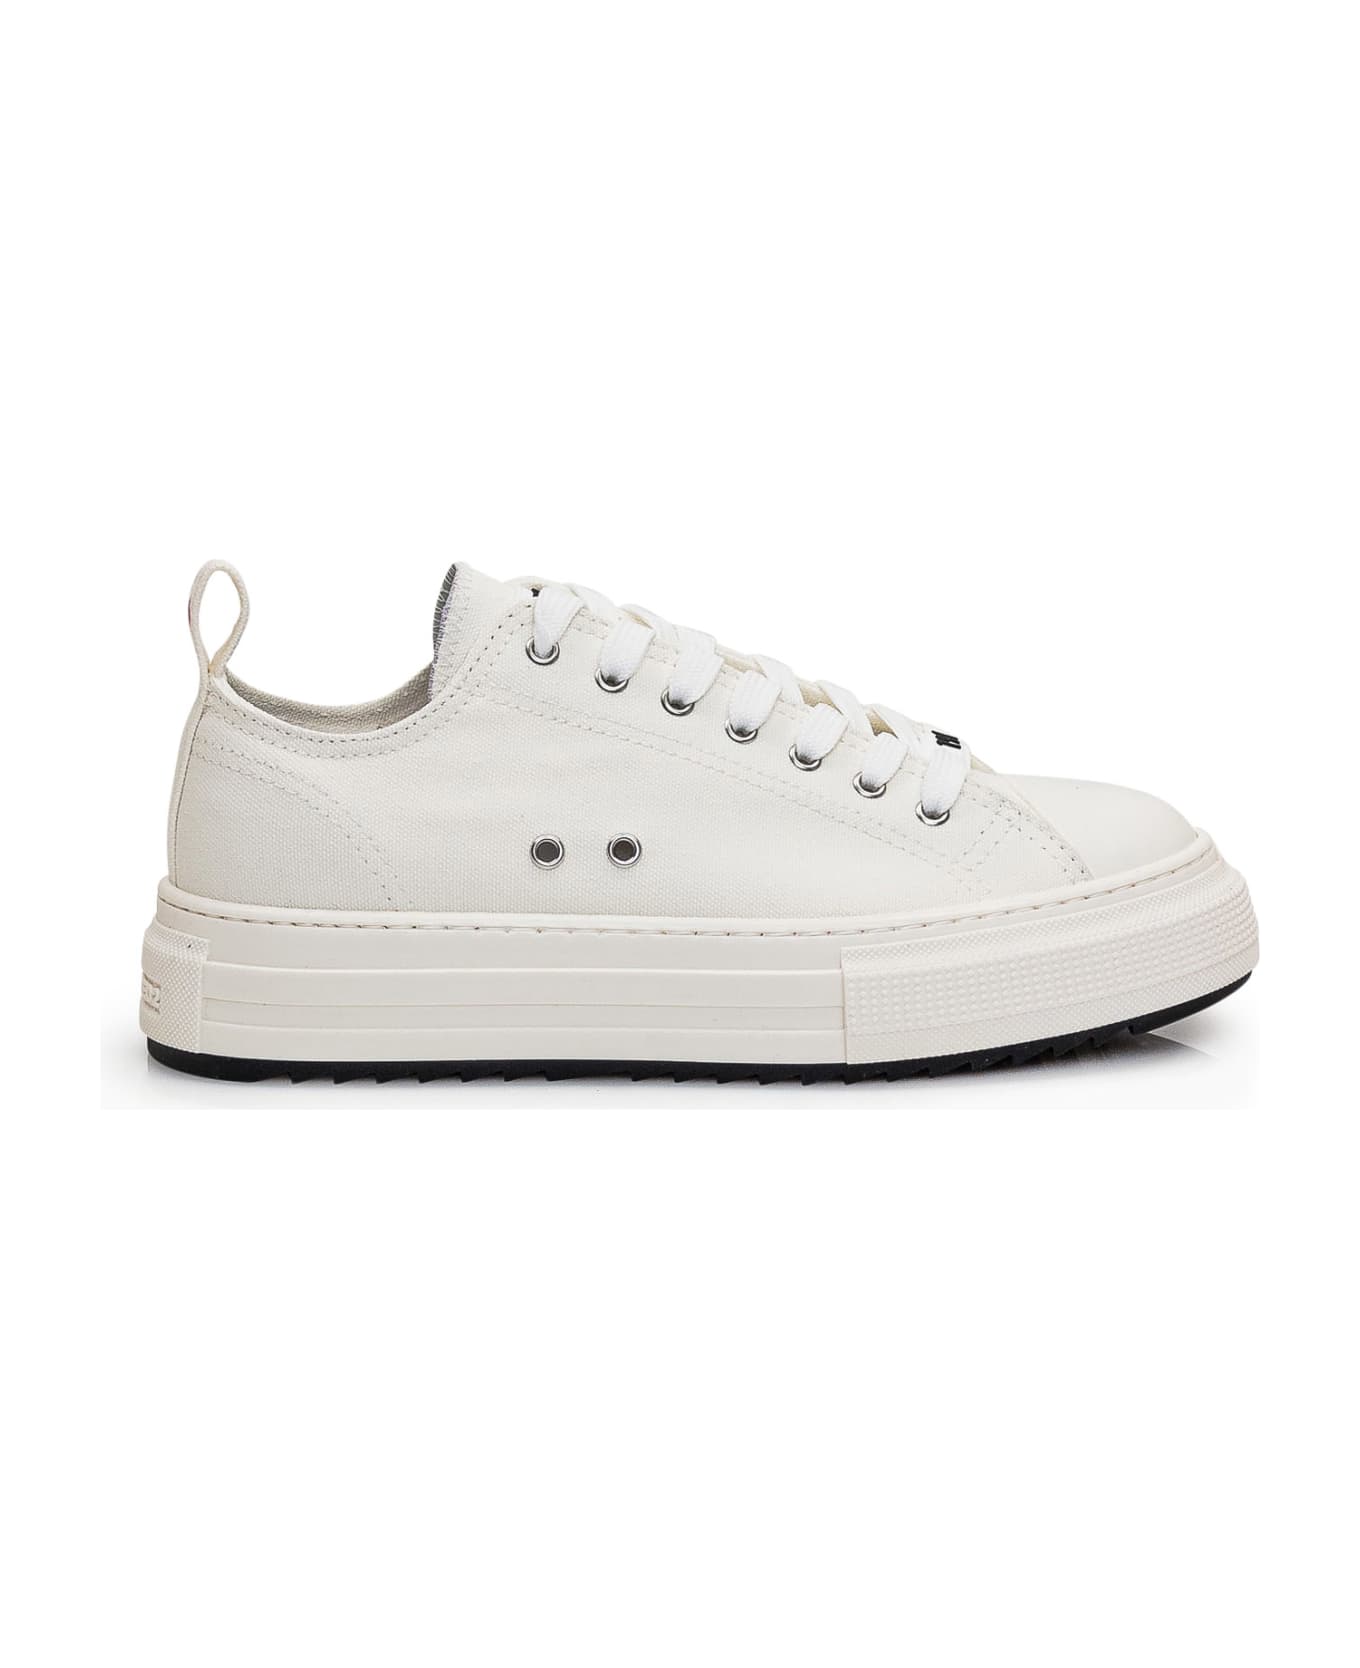 Dsquared2 Berlin Sneakers - WHITE